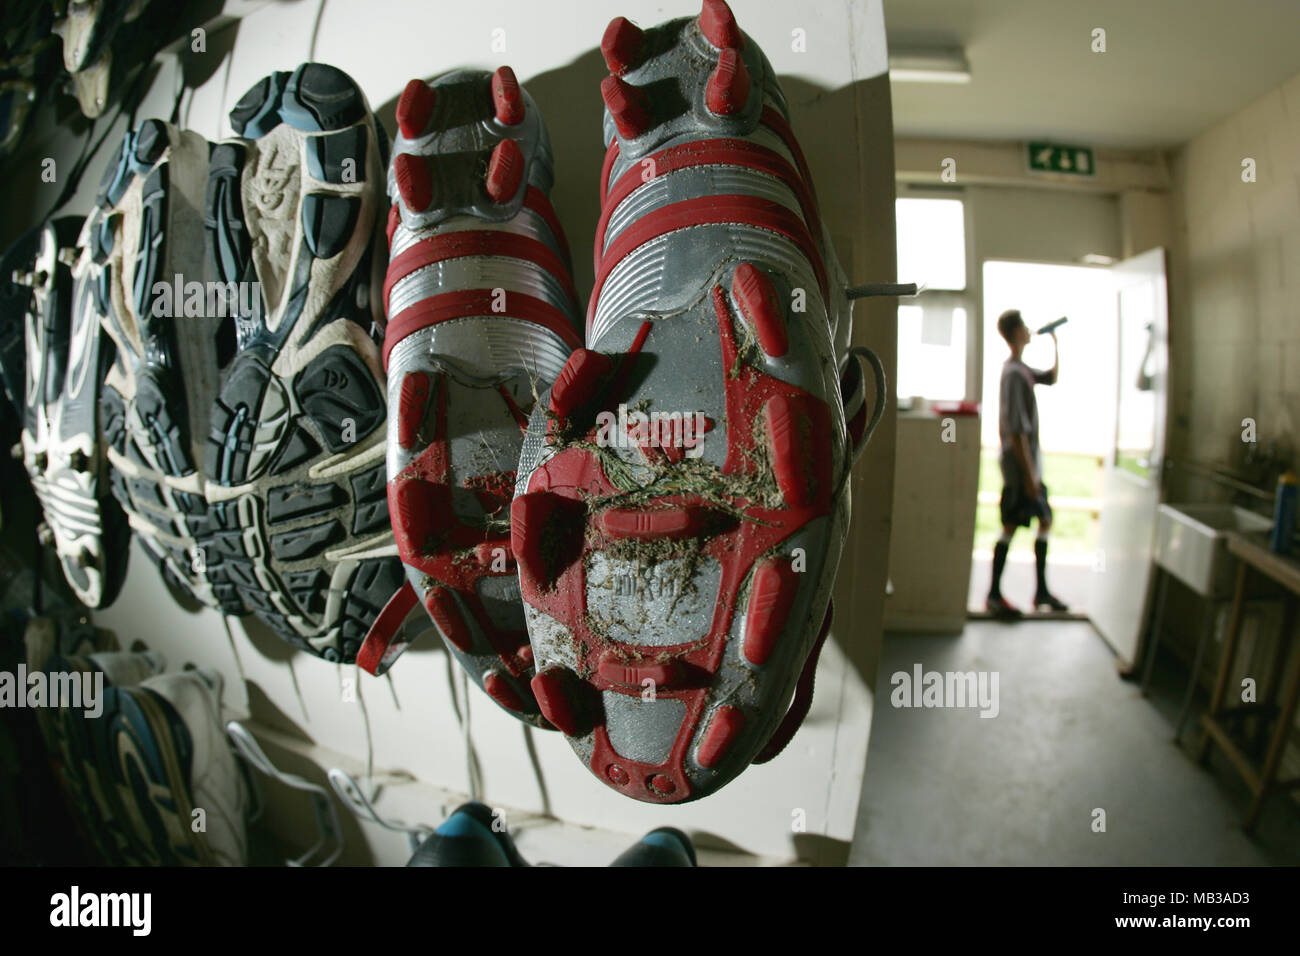 Red and silver Adidas football boots showing tread pattern from the 2004-6  era hung up on hooks in a changing room Stock Photo - Alamy